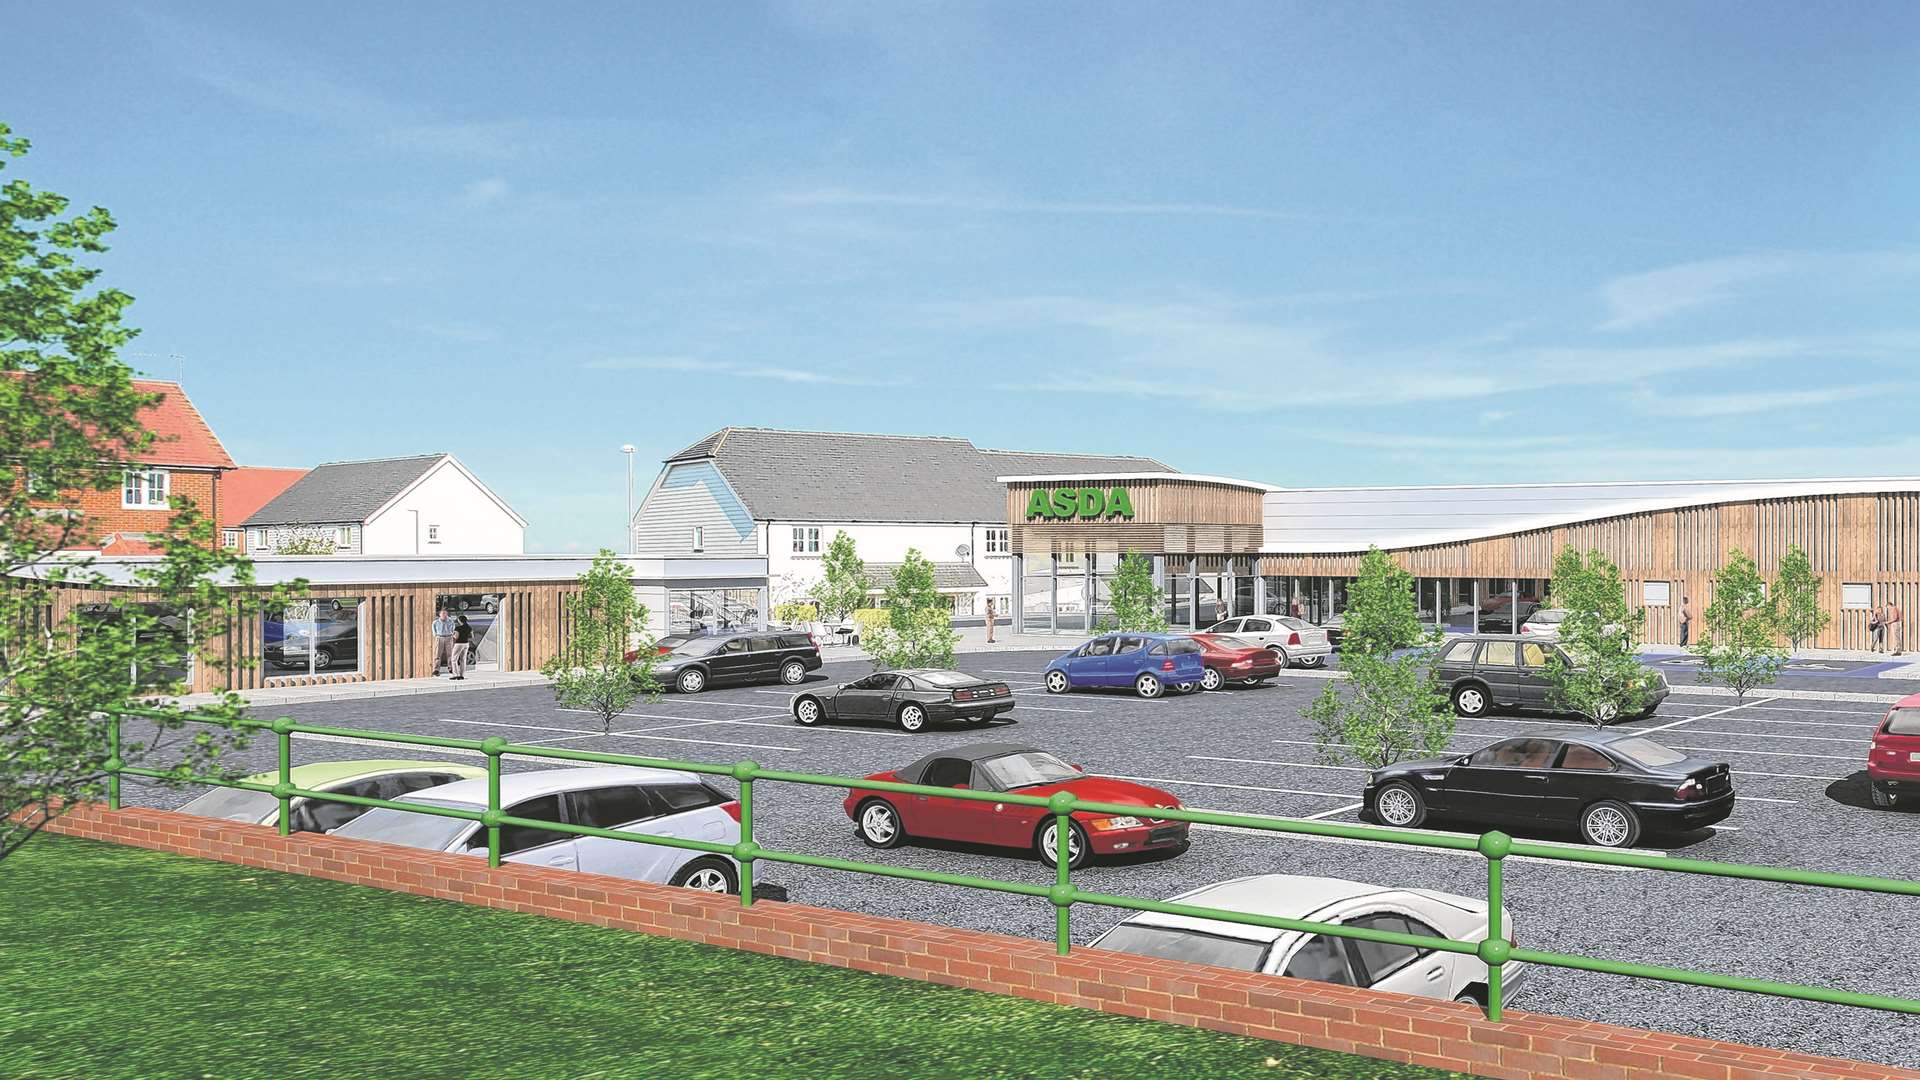 Artist's impression of how Asda's Minster store could look